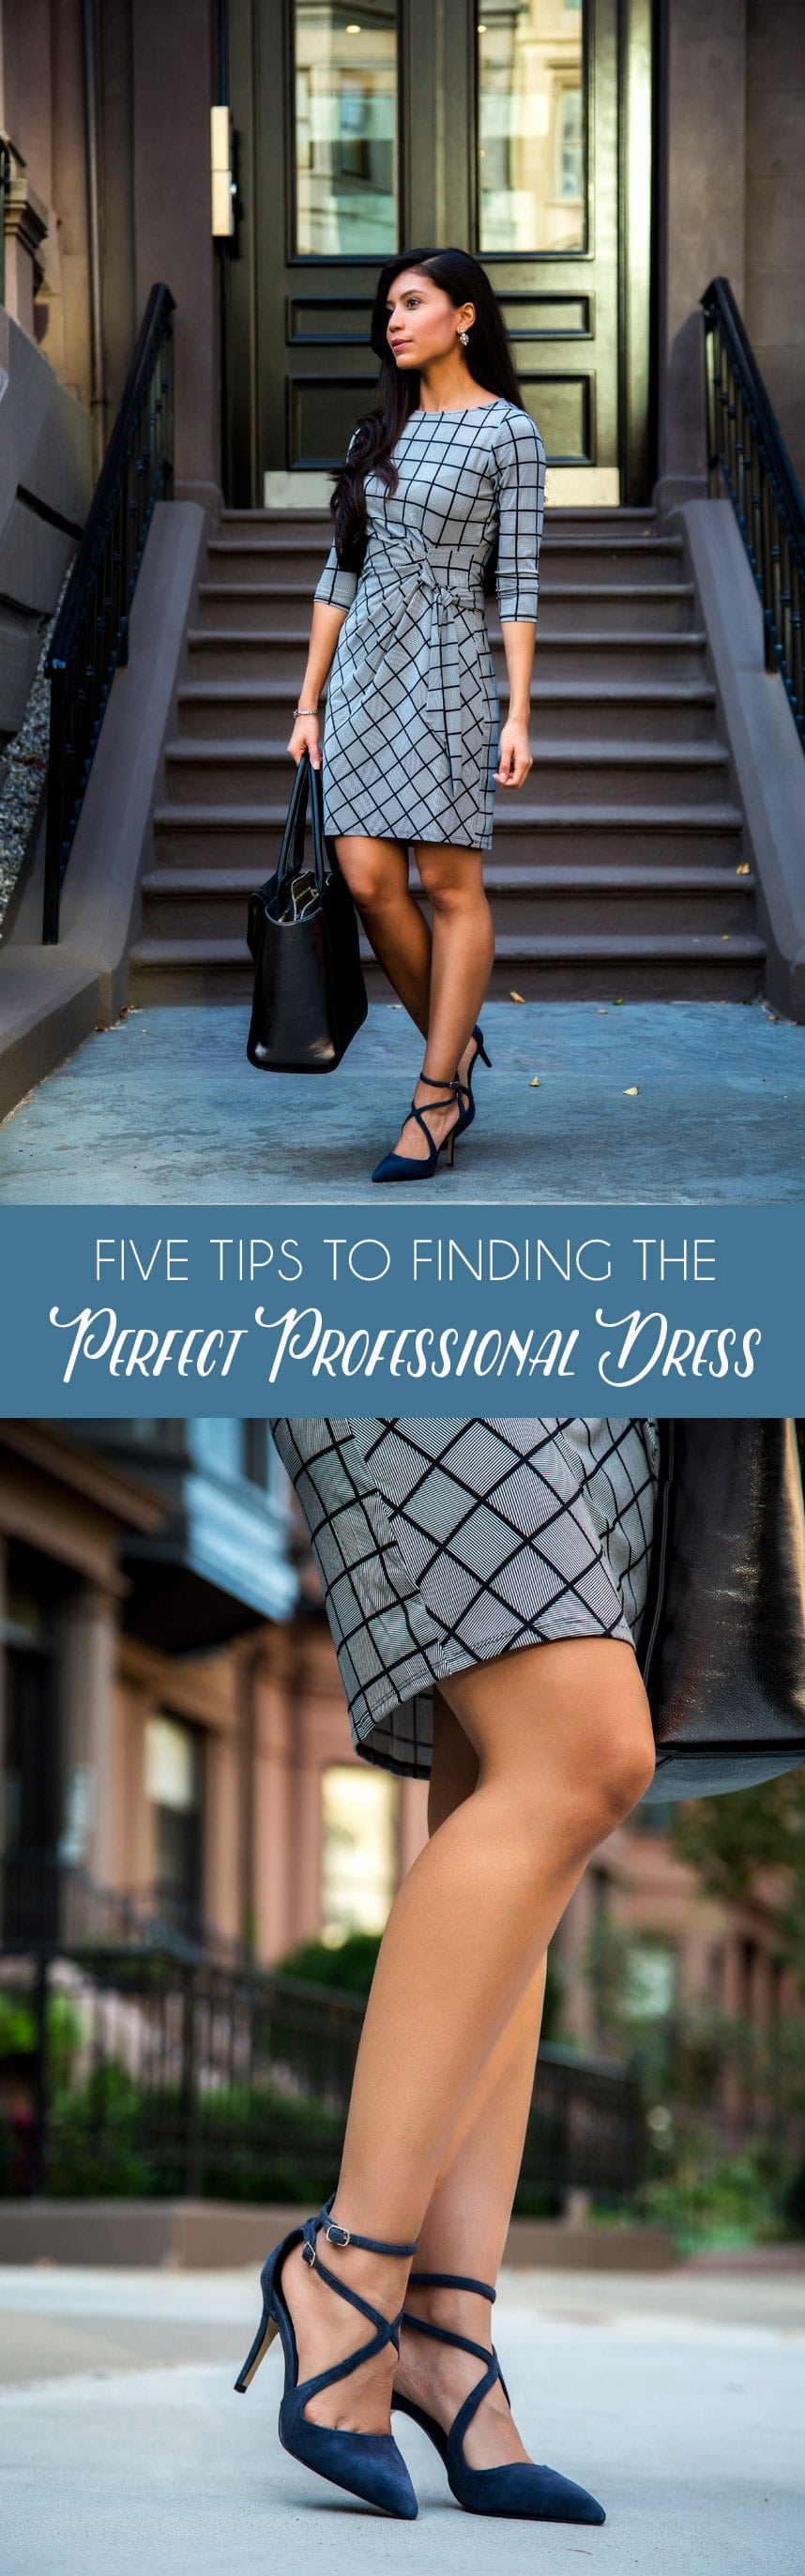 Five tips to finding the perfect professional dress - Visit Stylishlyme.com to read some style tips on how to dress professionally